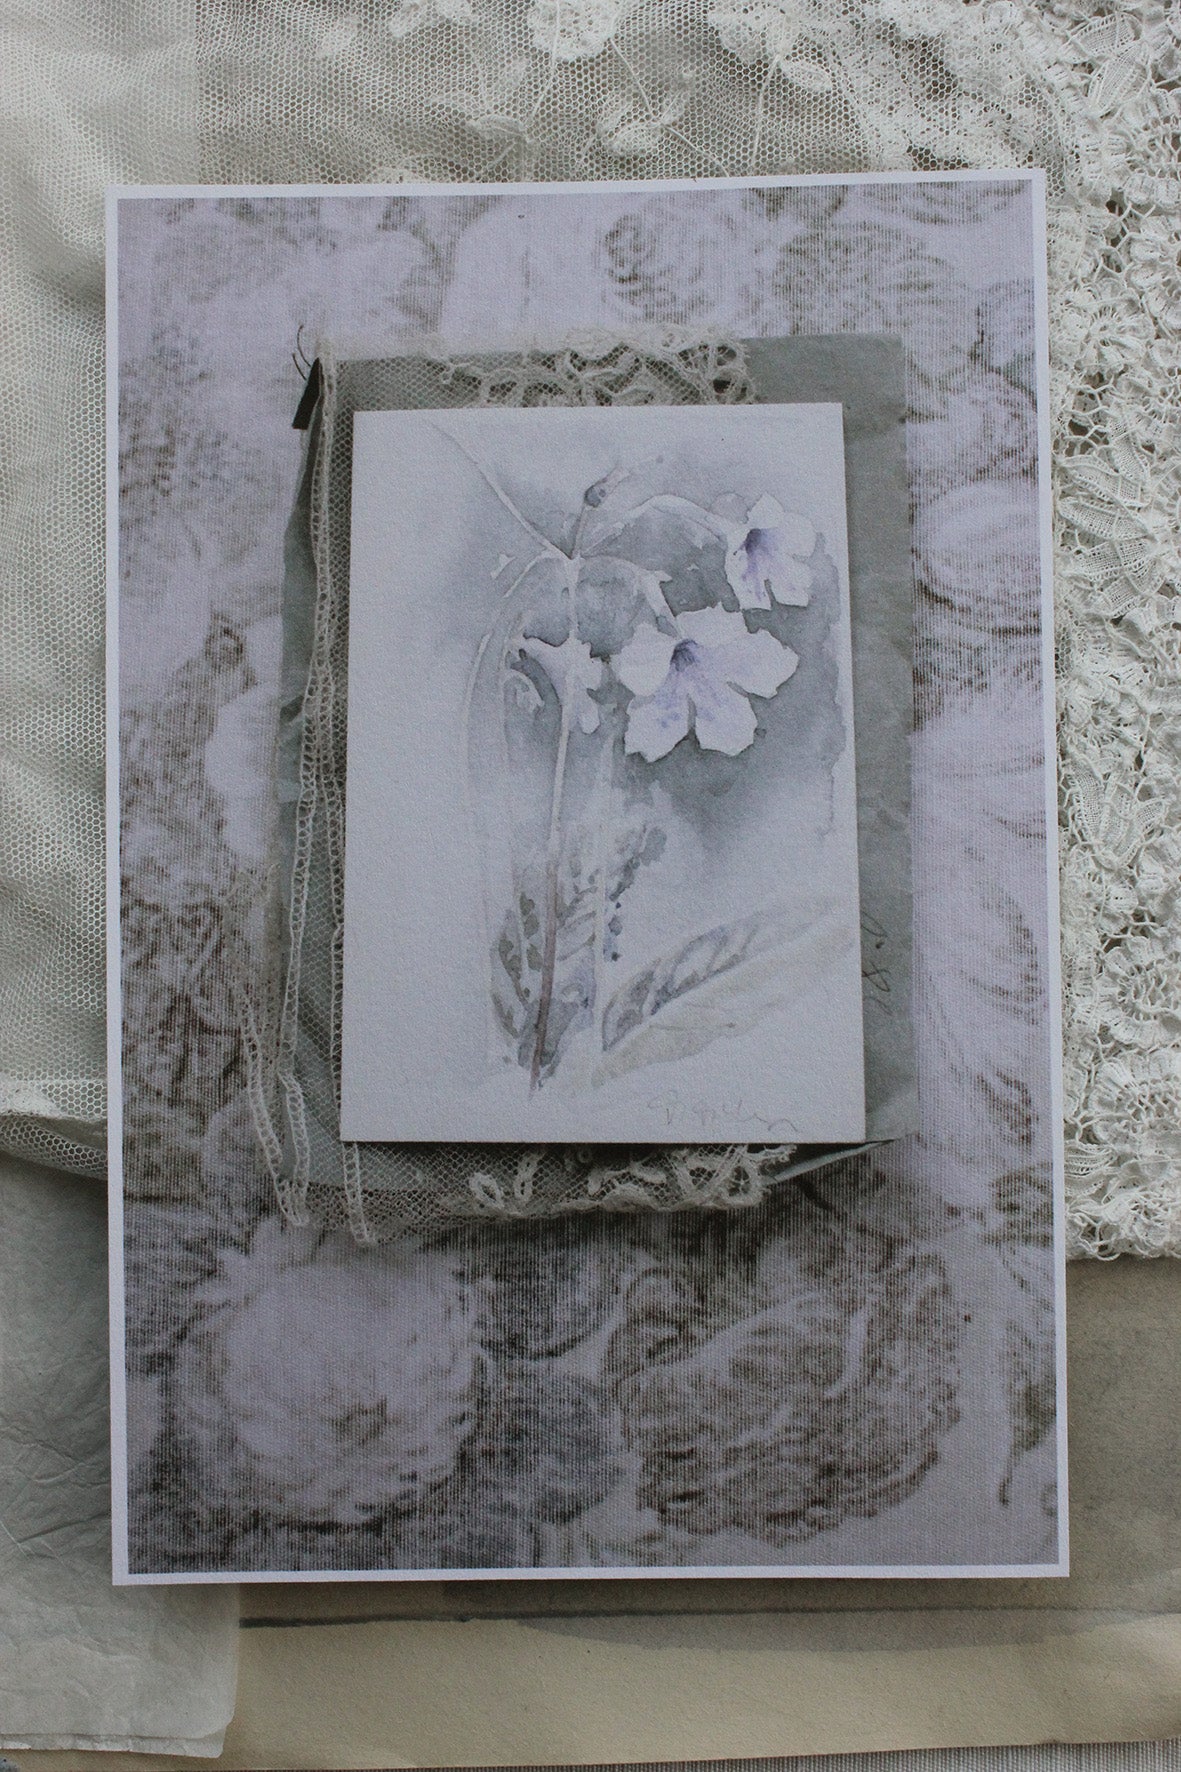 Pin Board Prints from The Linen Garden Studio ~ "Lace & Grey" collection